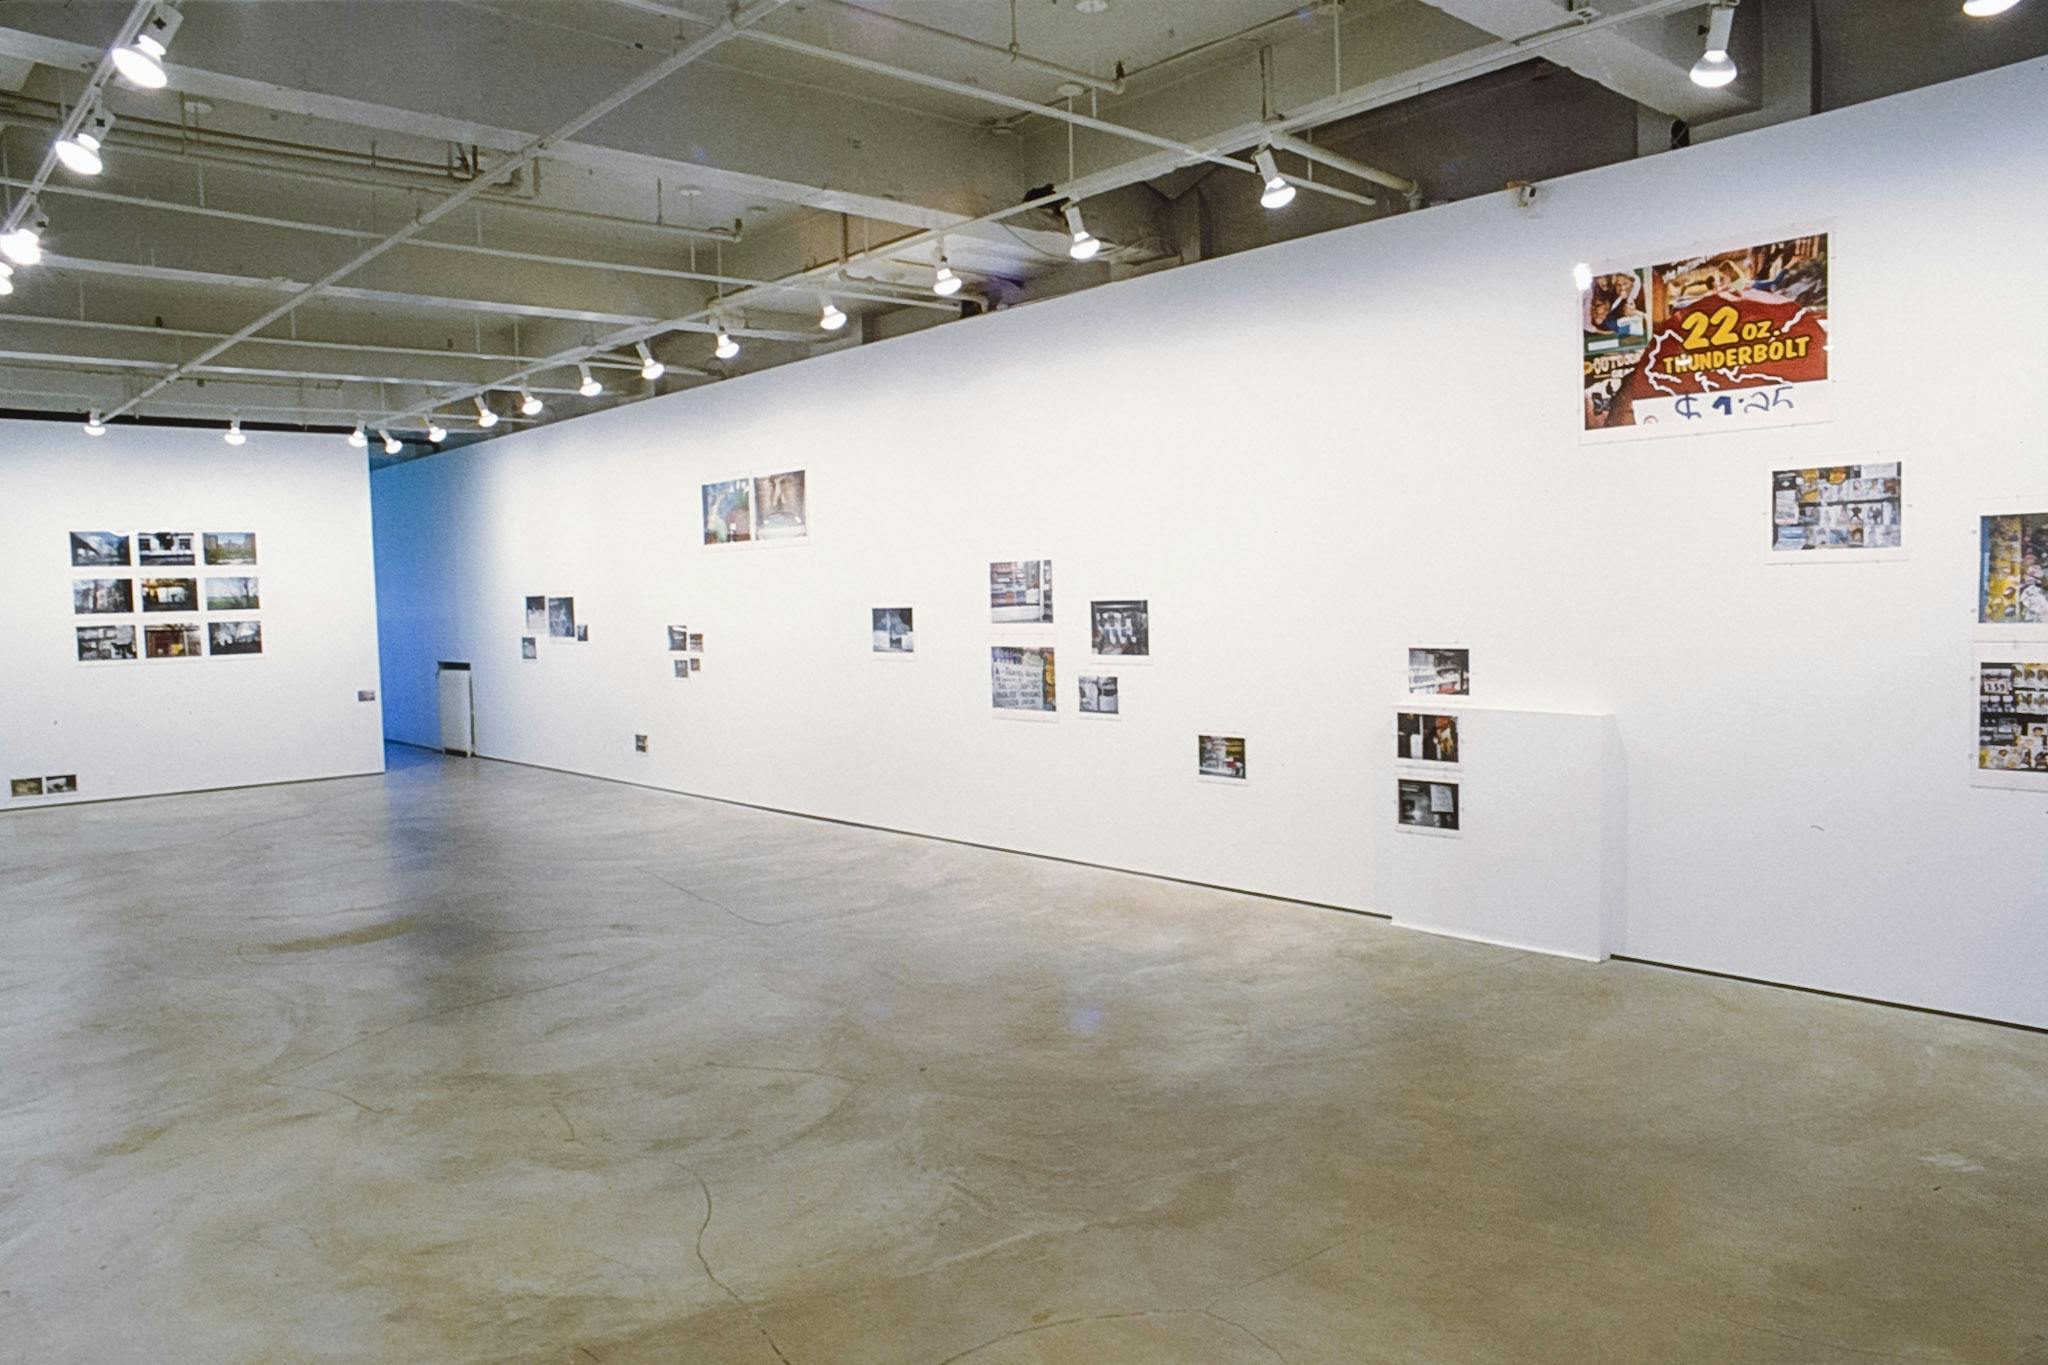 Various coloured photographs of various sizes are displayed on white gallery walls. The large-sized photograph at the top includes “22oz. THUNDERBOLT” printed in yellow over the images.